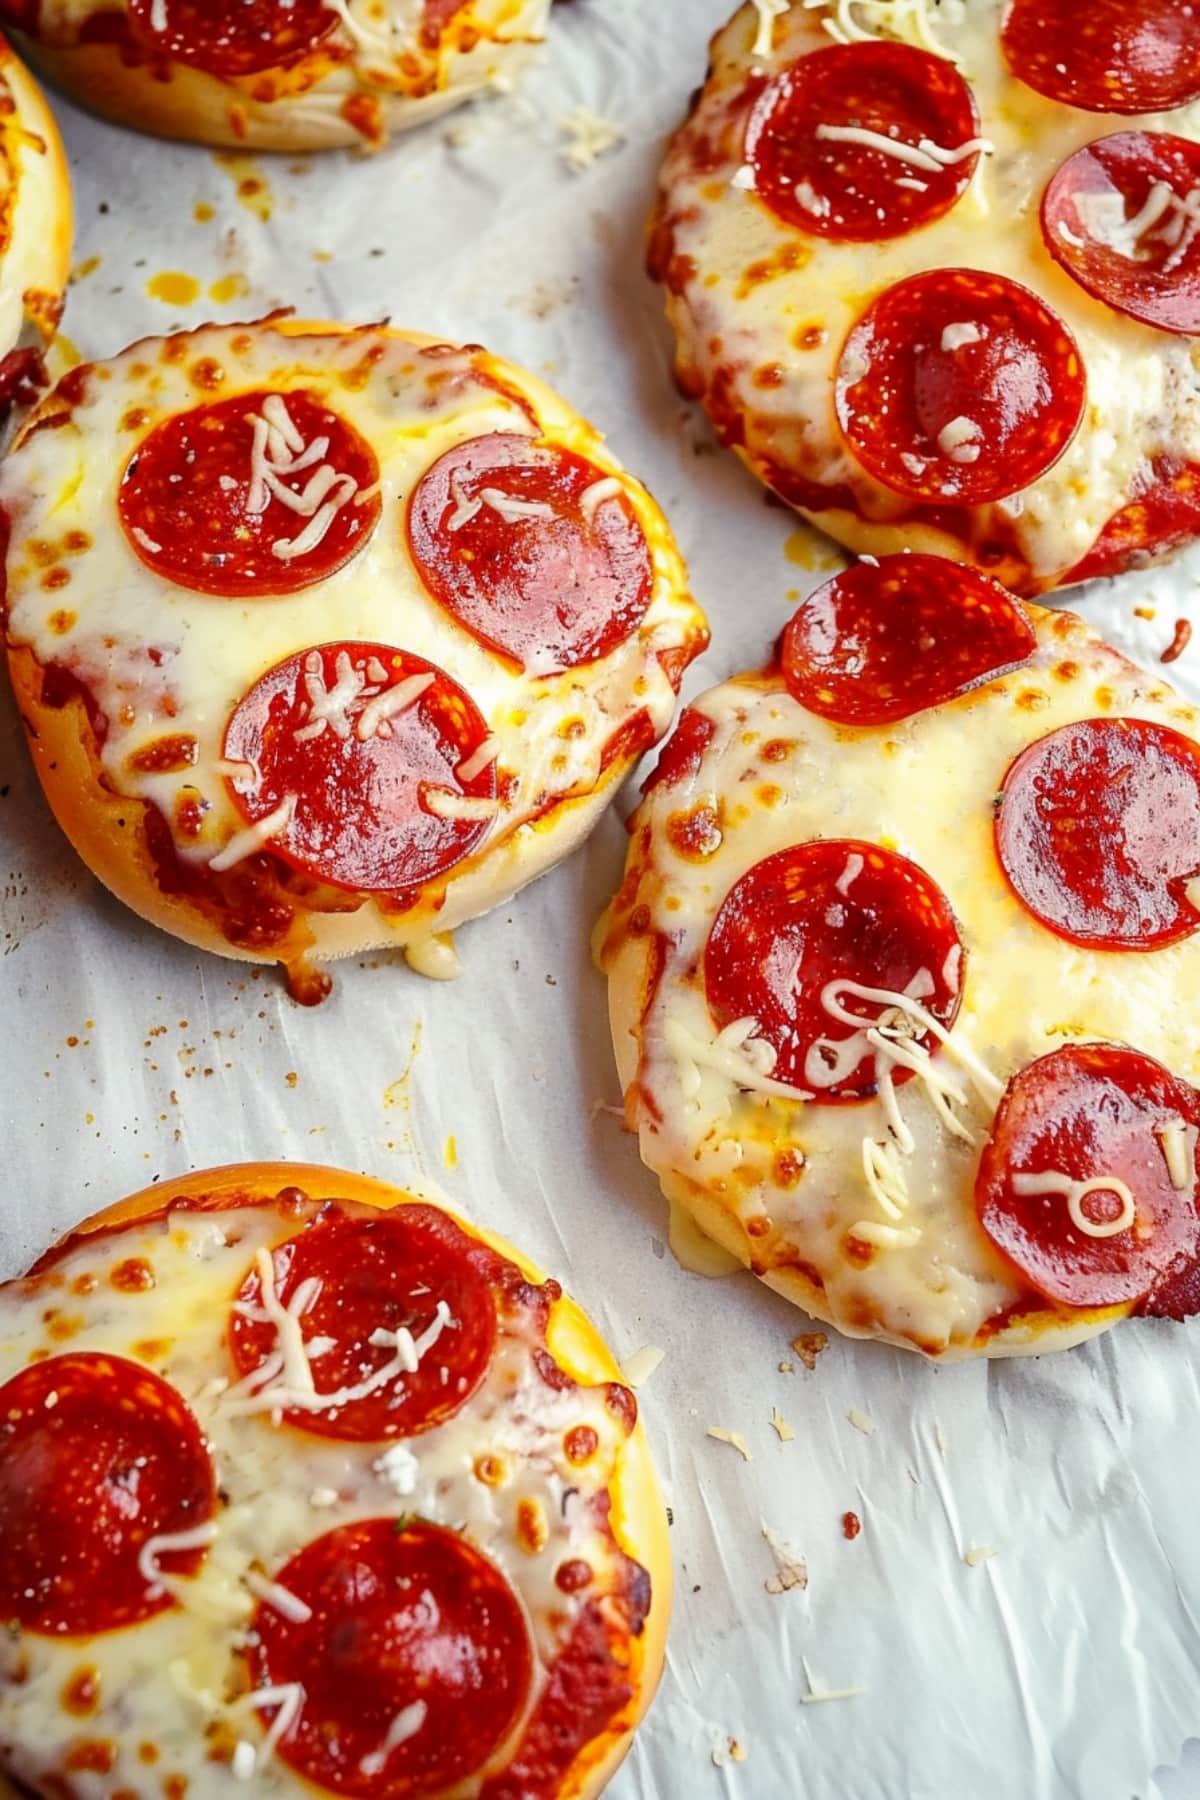 Flavor-packed pizza burgers with pepperoni slices, smothered in marinara sauce and melted mozzarella